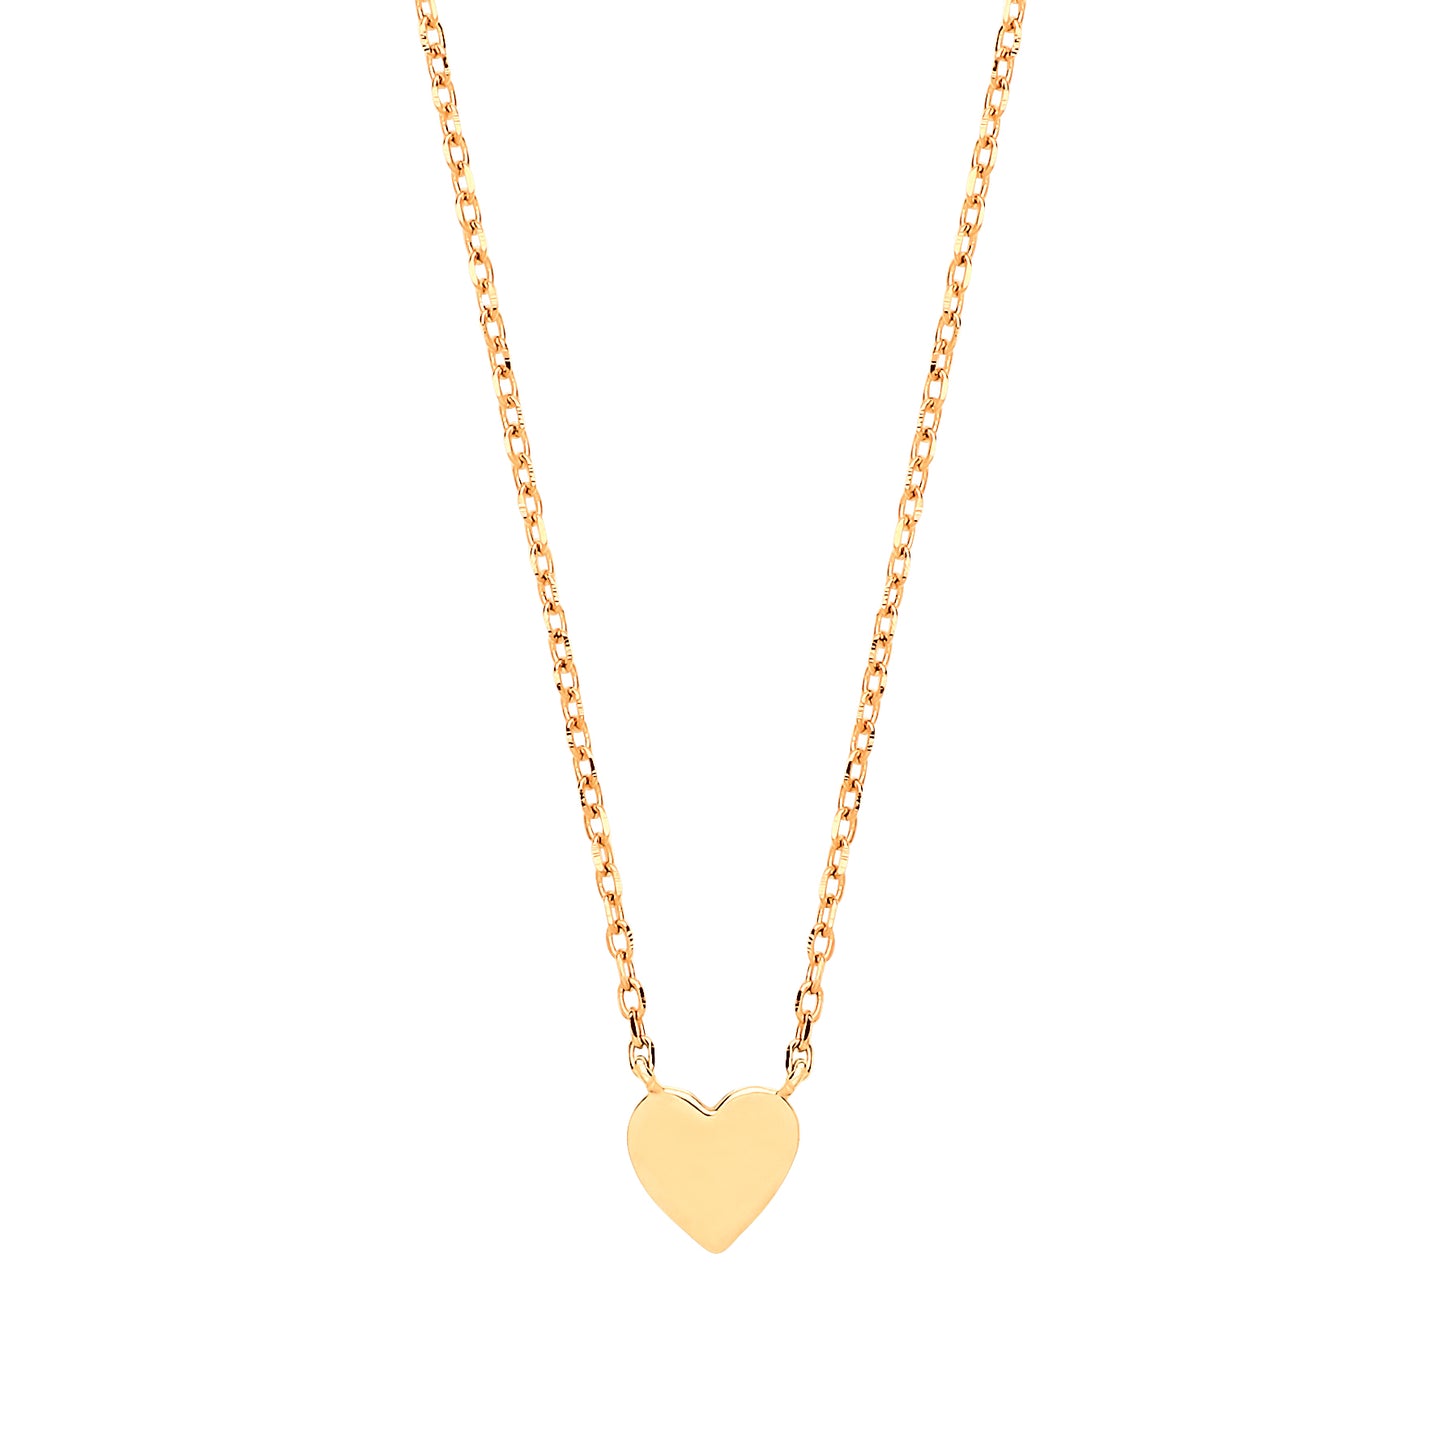 Gilded Silver  Love Heart Charm Necklace 16 inch - GVK277